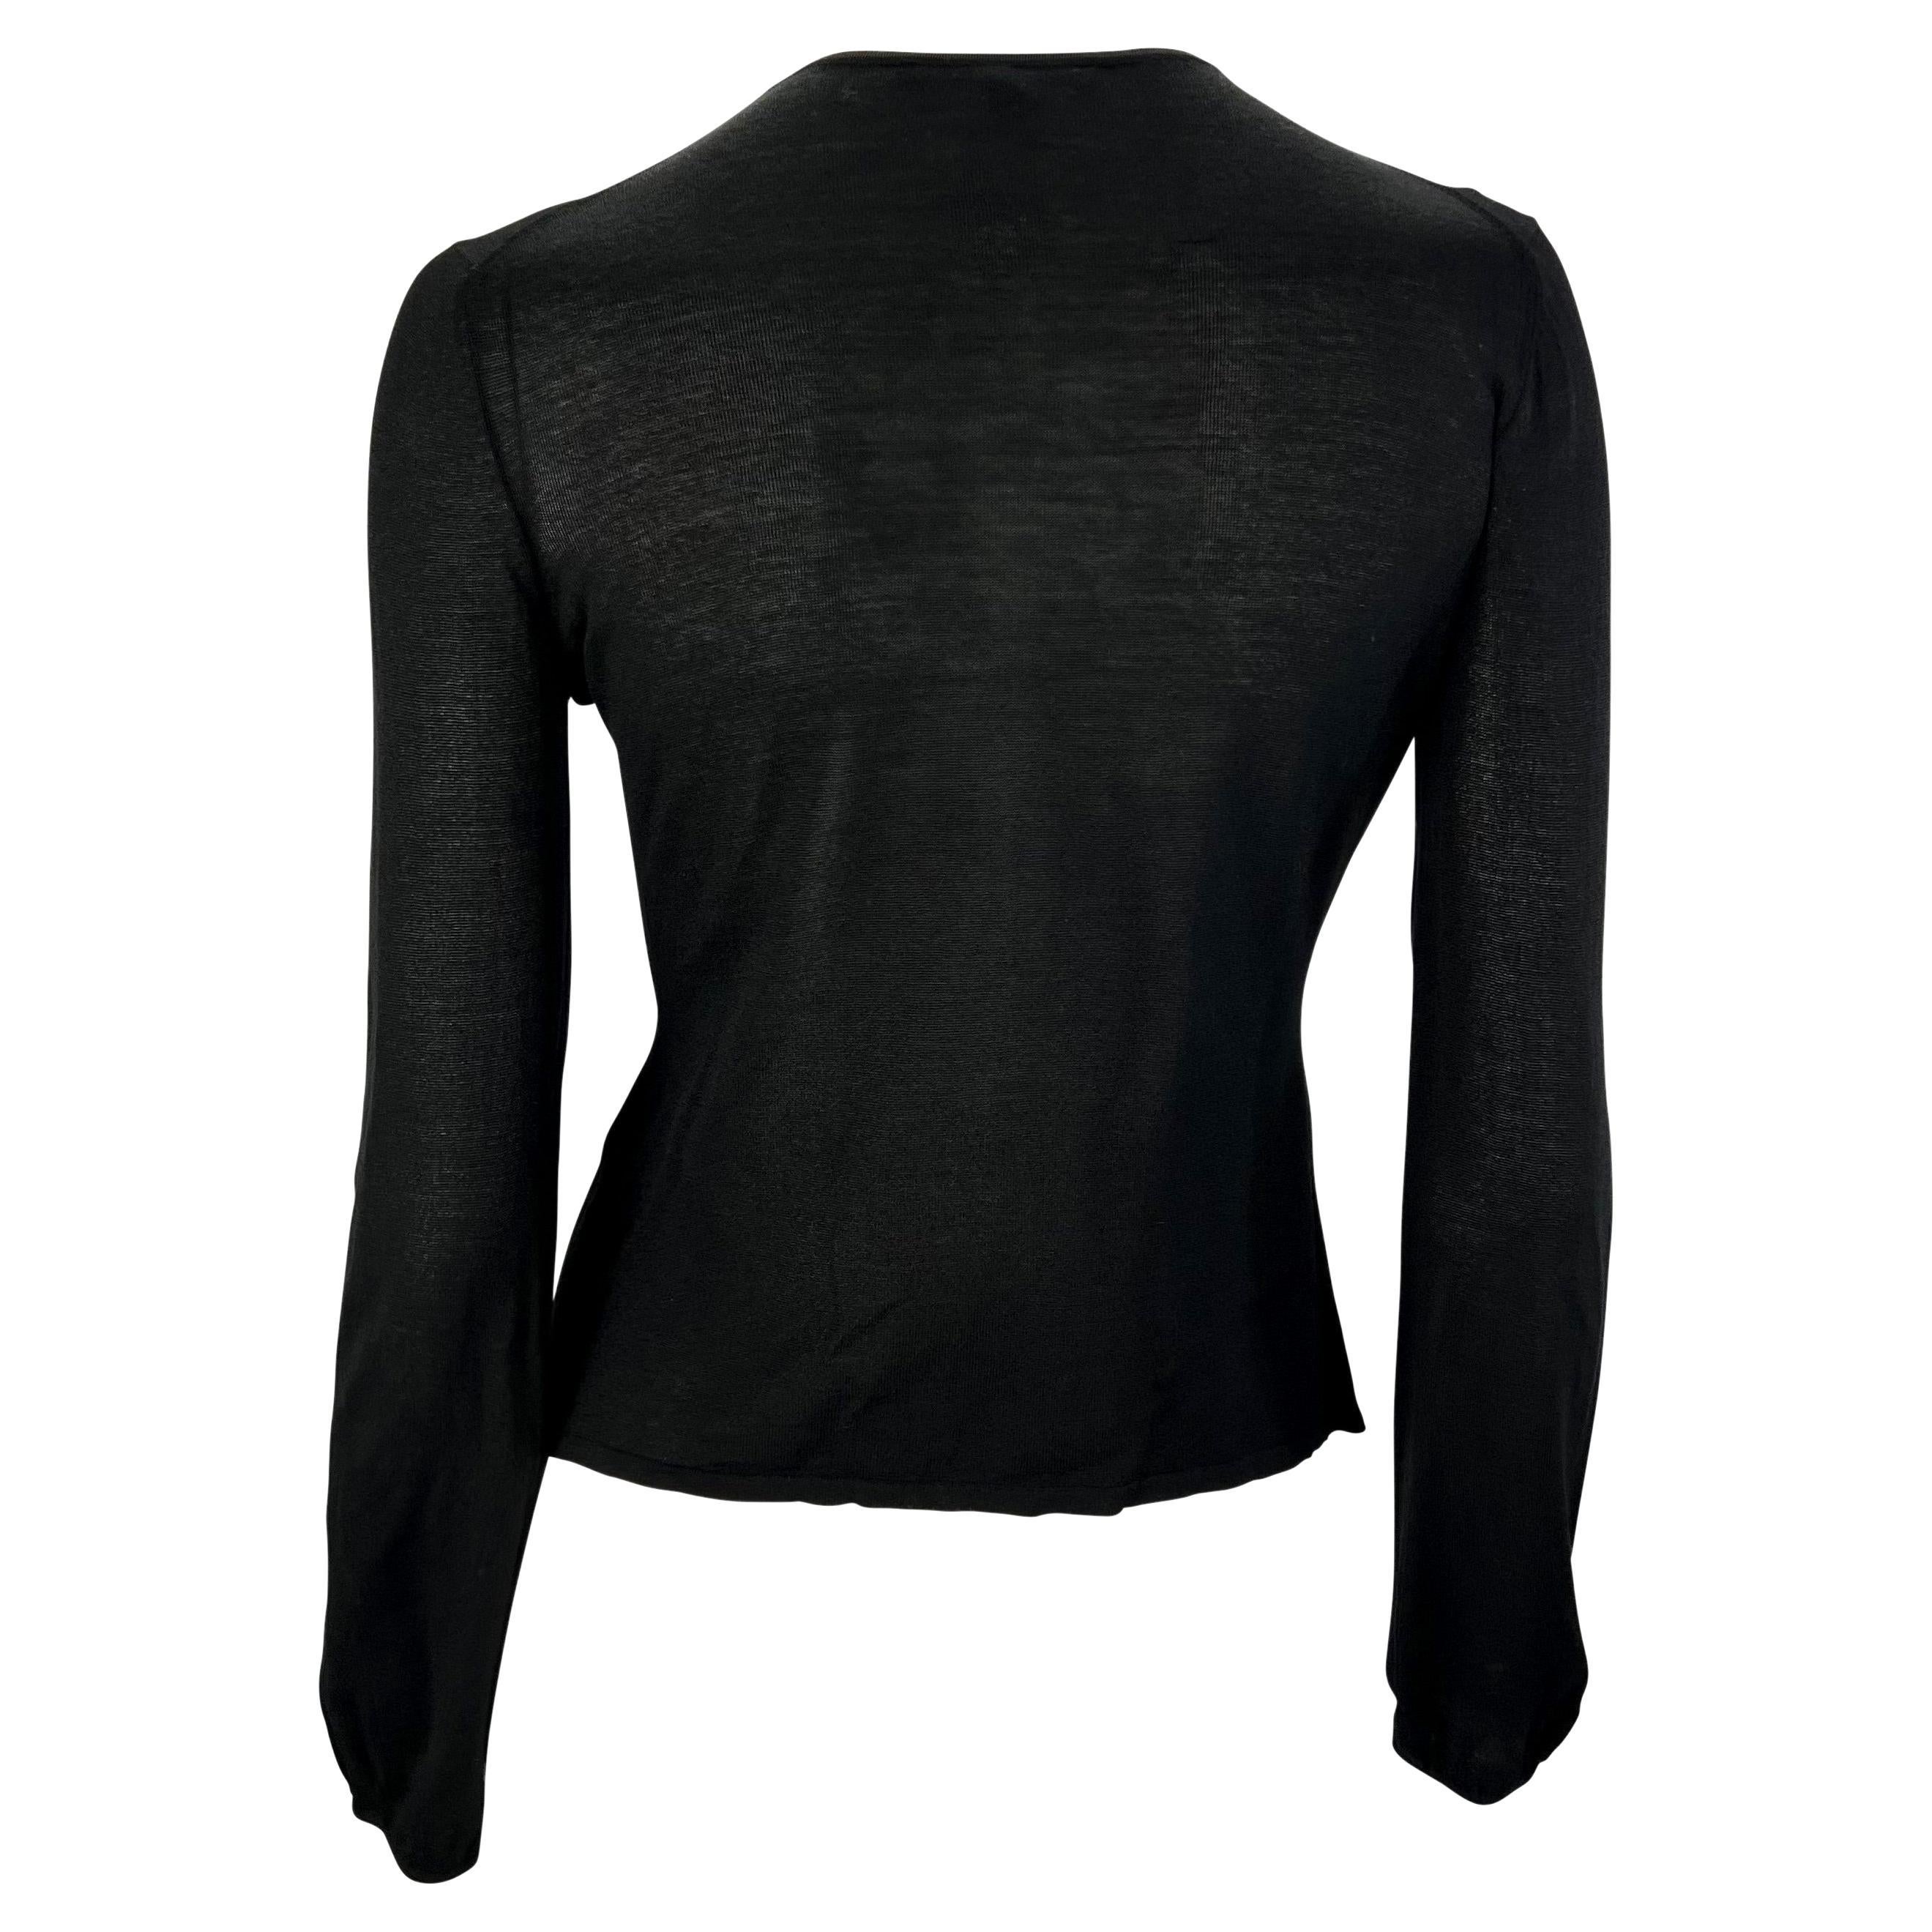 F/W 1999 Gucci by Tom Ford Runway Black Leather Flower Plunge Sheer Knit Top 1